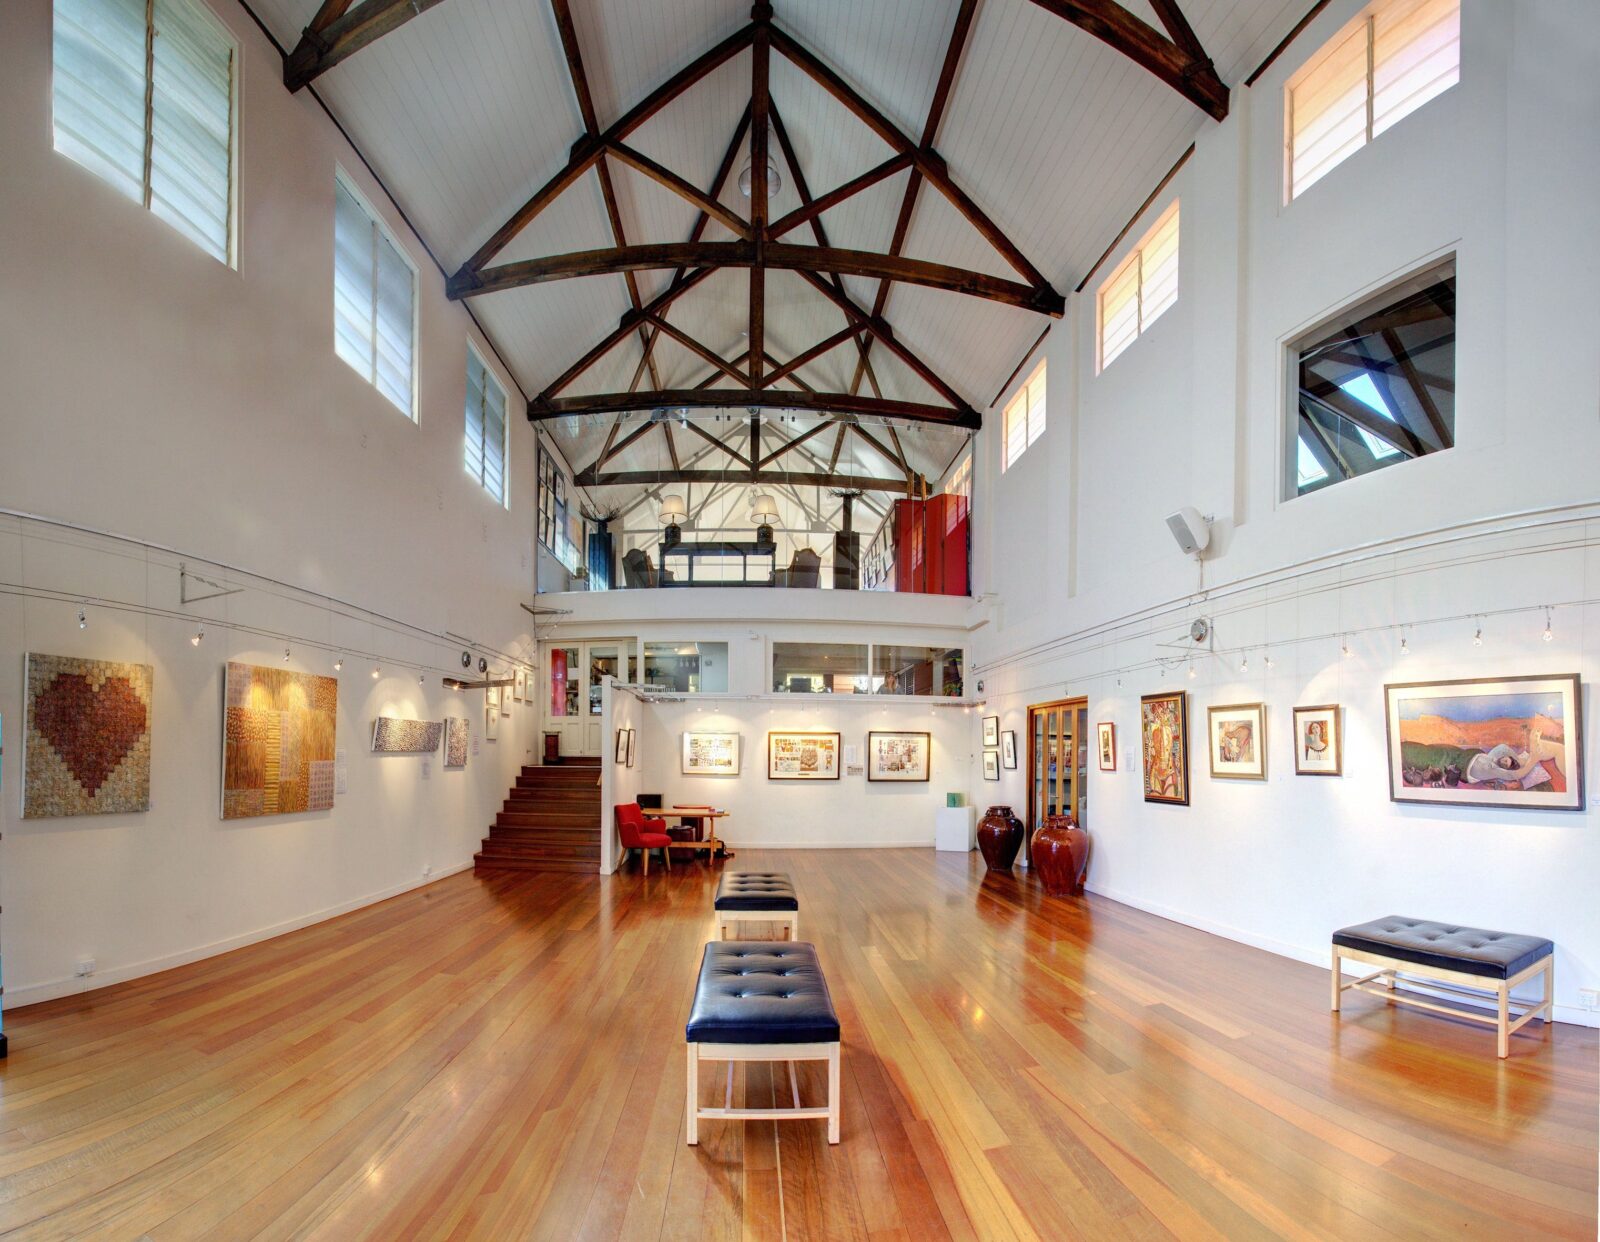 The main gallery holds monthly exhibitions featuring paintings, sculpture, glass and ceramics